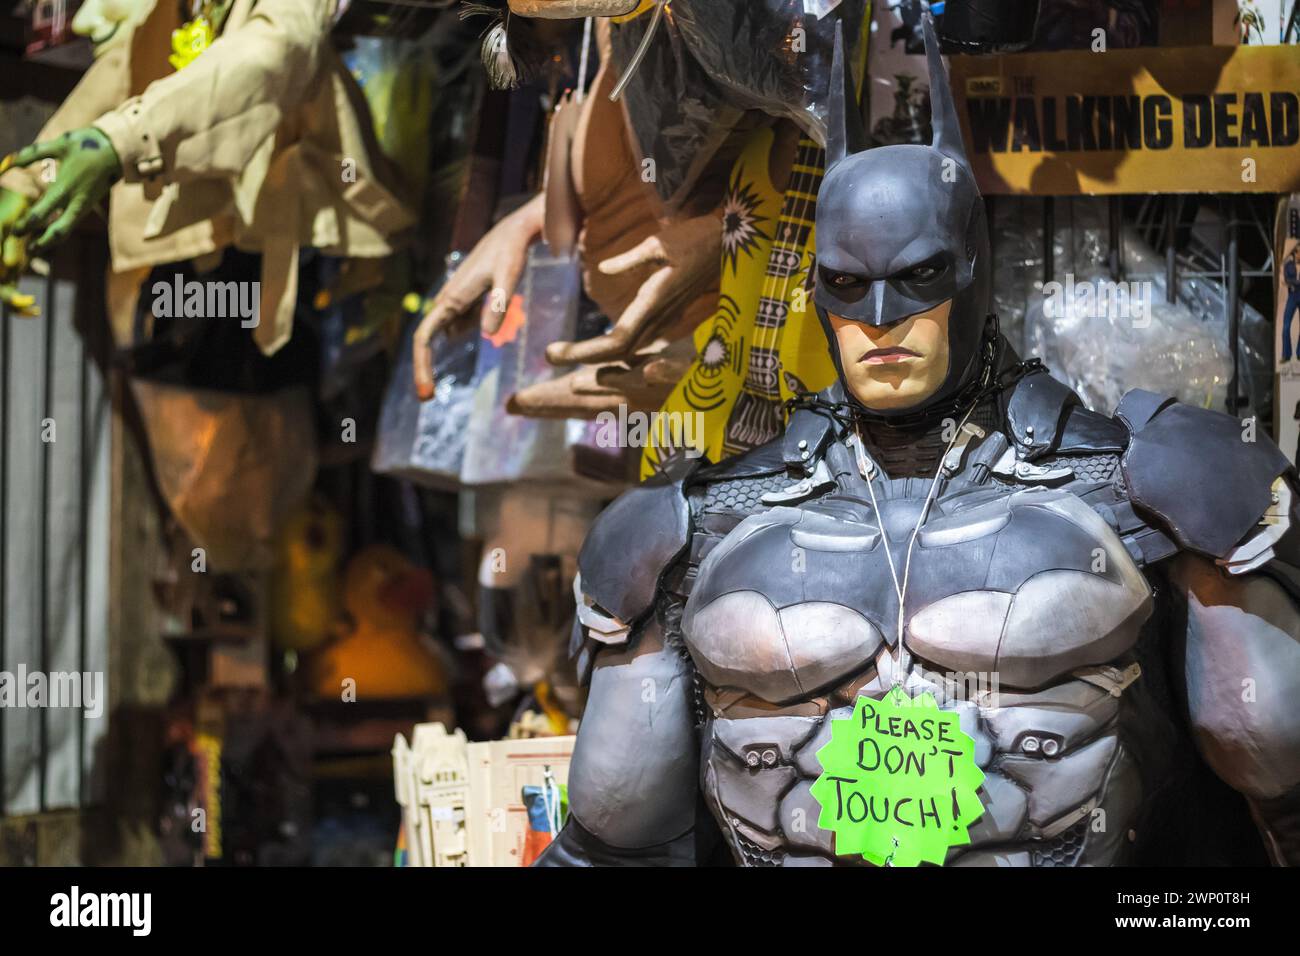 London, UK - 12 September, 2023 - A life size replica of Batman on display at film and TV collectibles shop in Camden Market Stock Photo